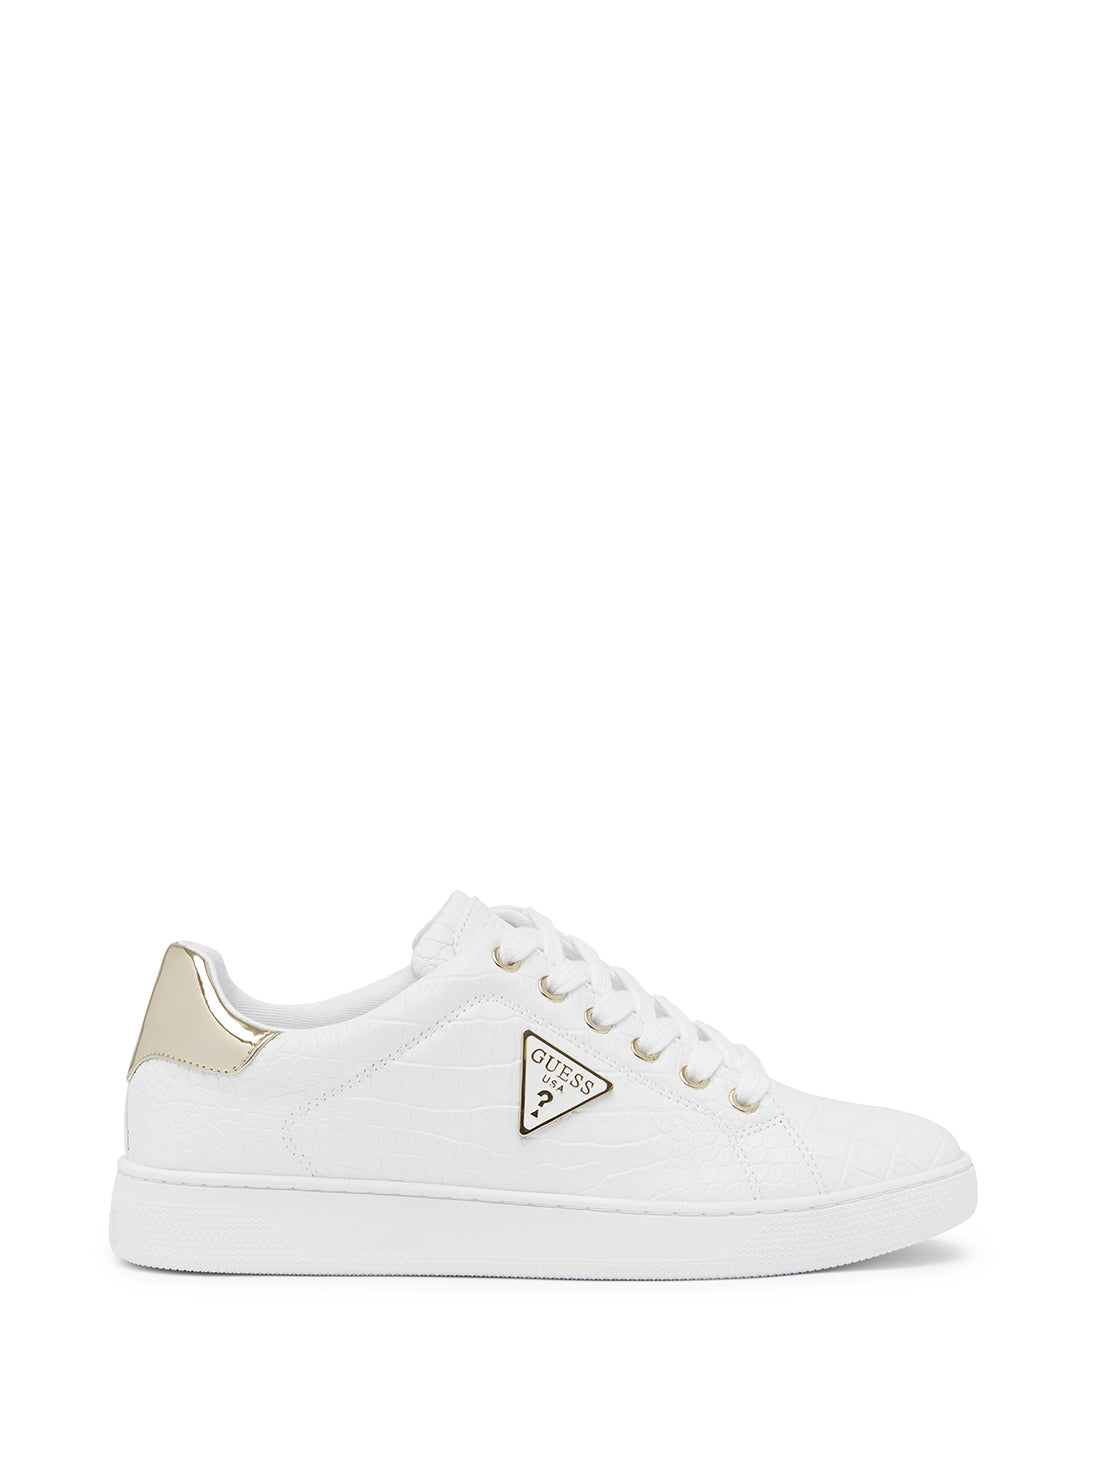 White Reshy-A Sneakers | GUESS Women's Shoes | side view